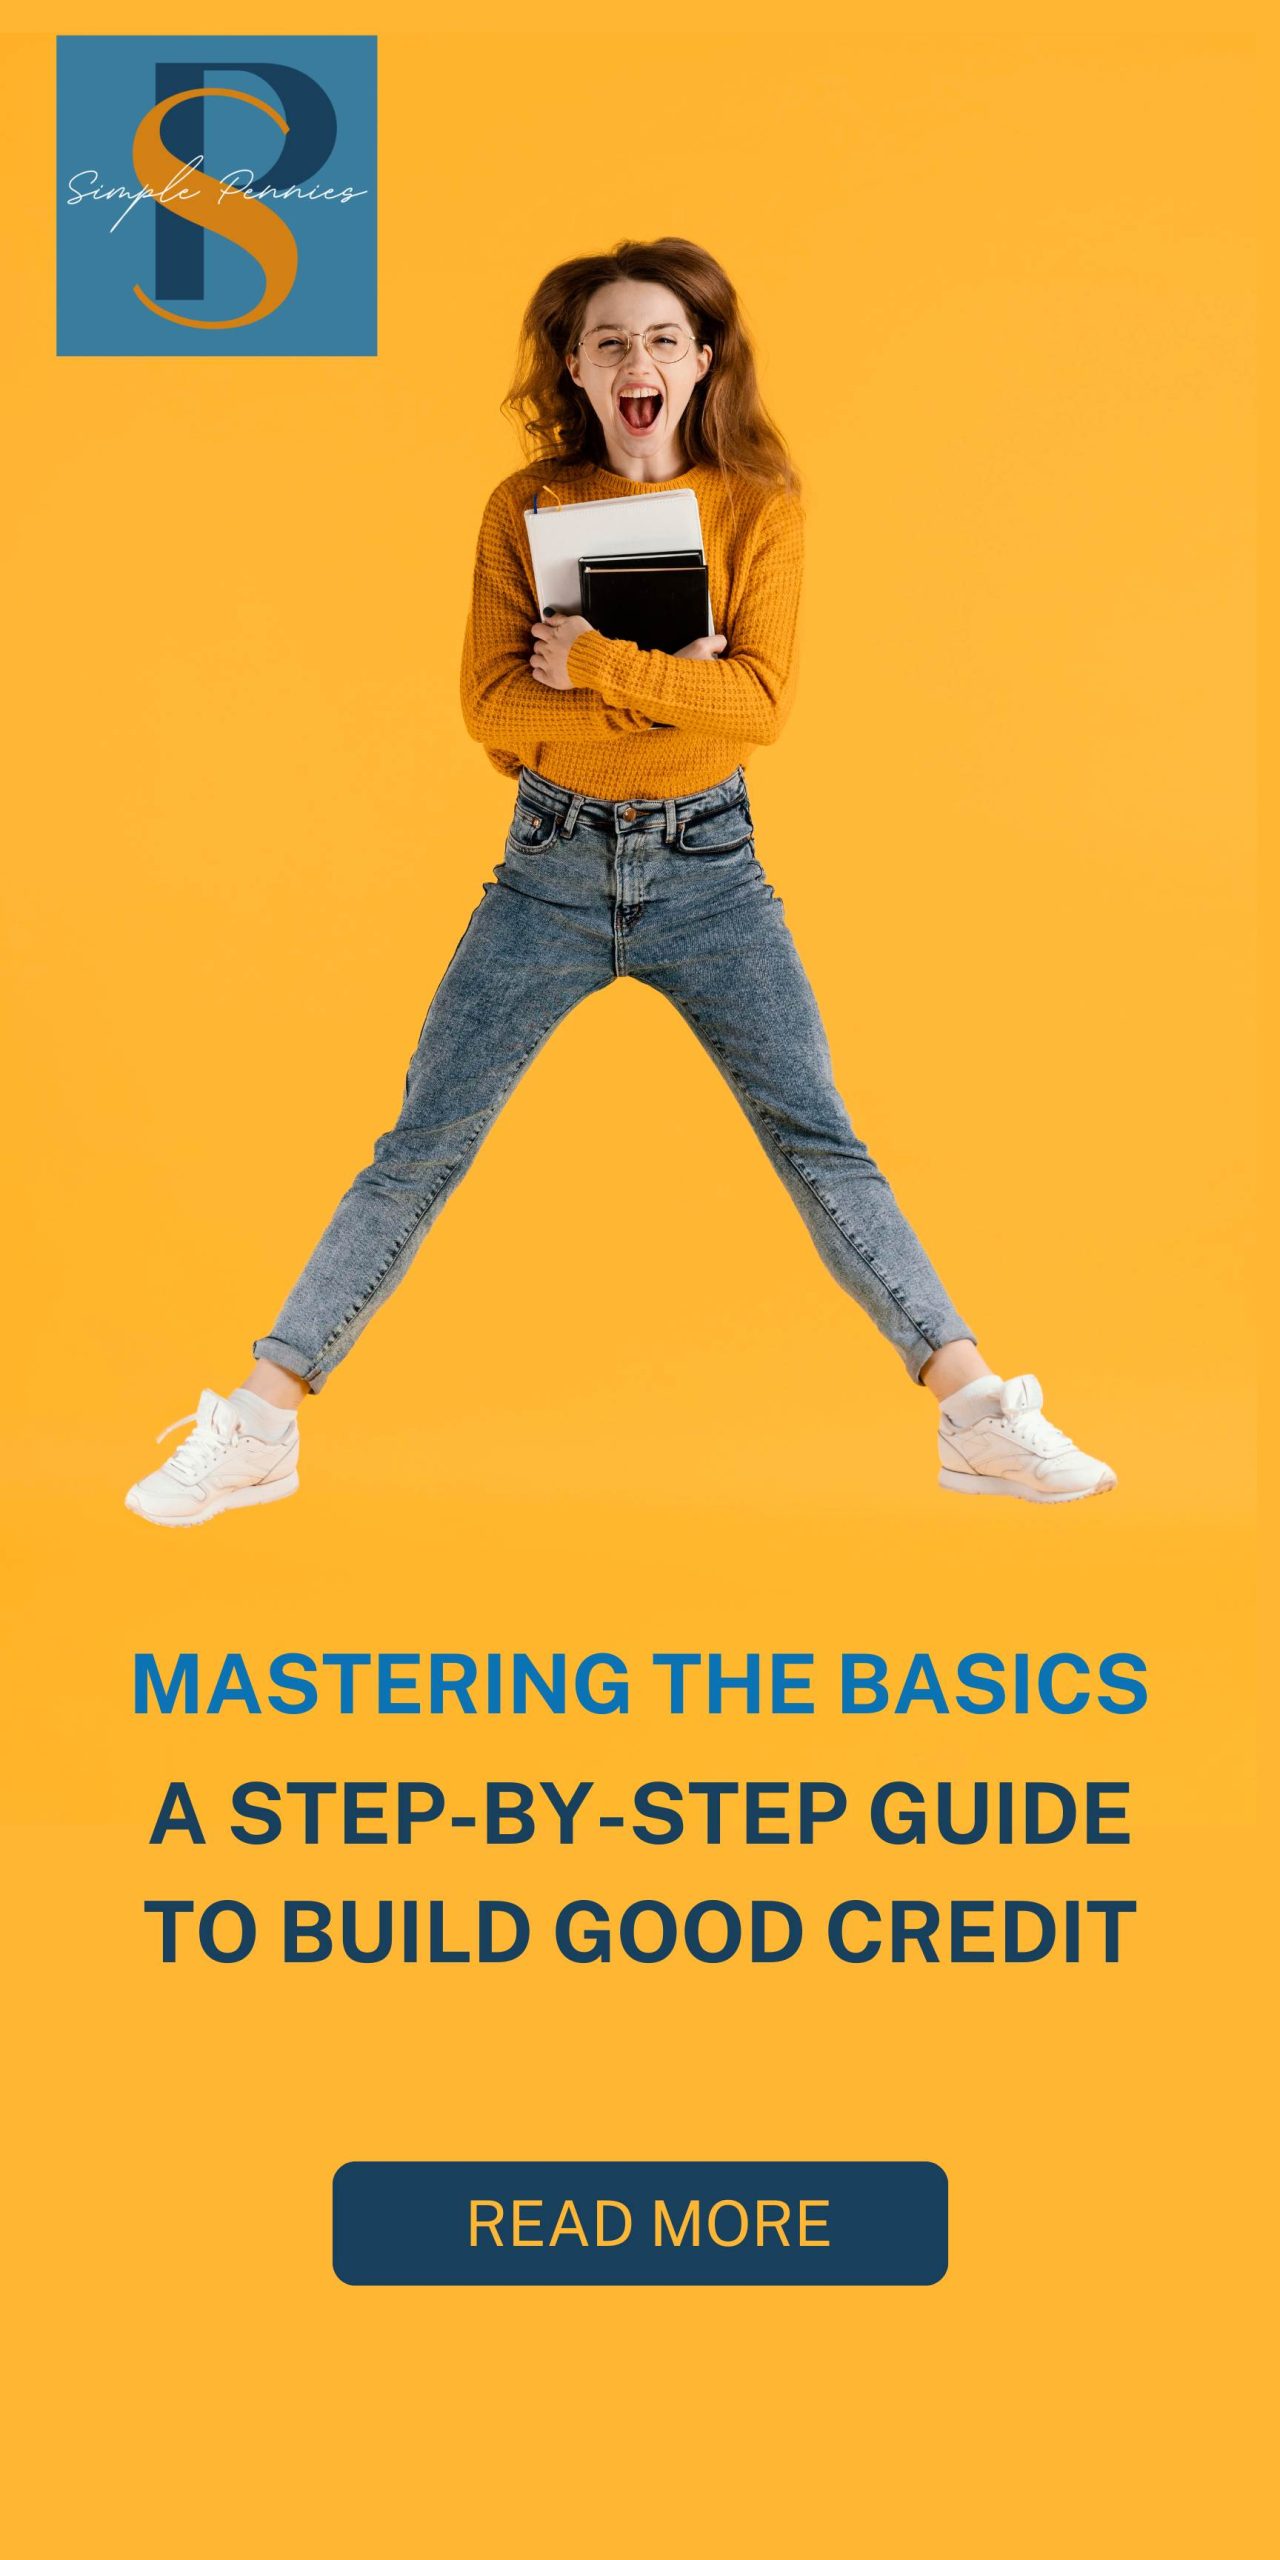 Mastering the Basics: A Step-by-Step Guide to Build Good Credit